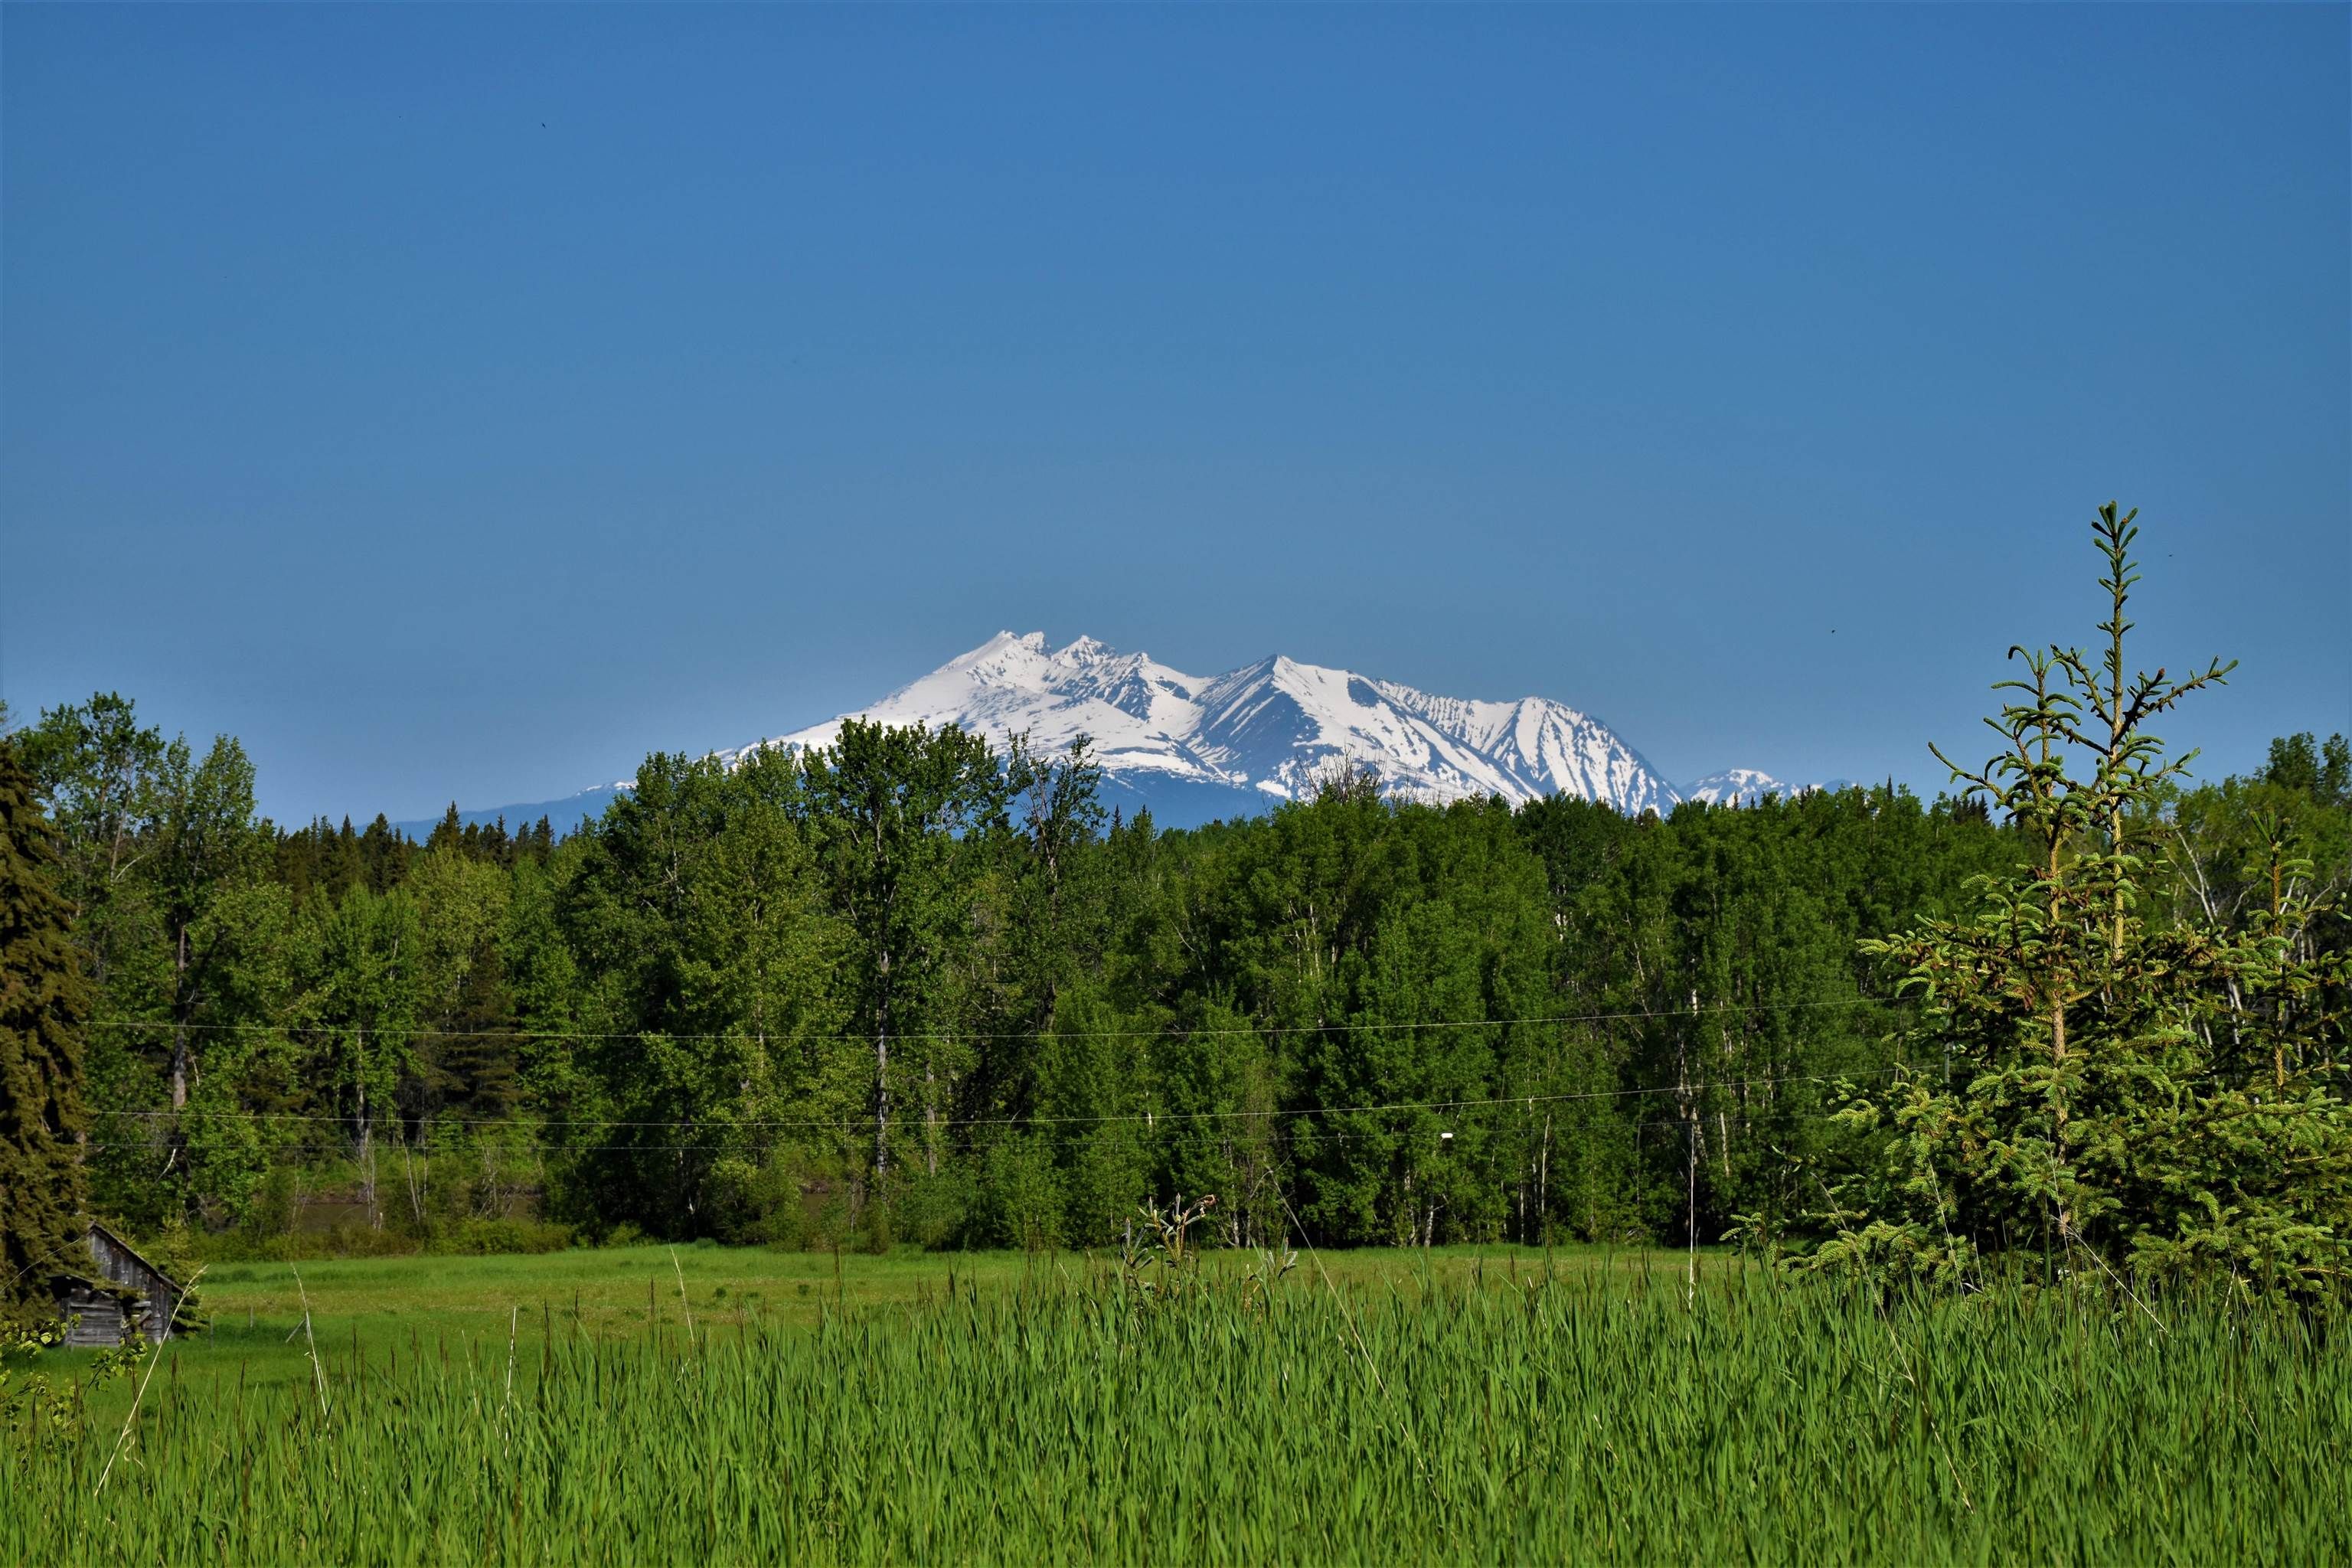 Main Photo: BOURGON ROAD in Smithers: Telkwa - Rural Land for sale (Smithers And Area)  : MLS®# R2700048